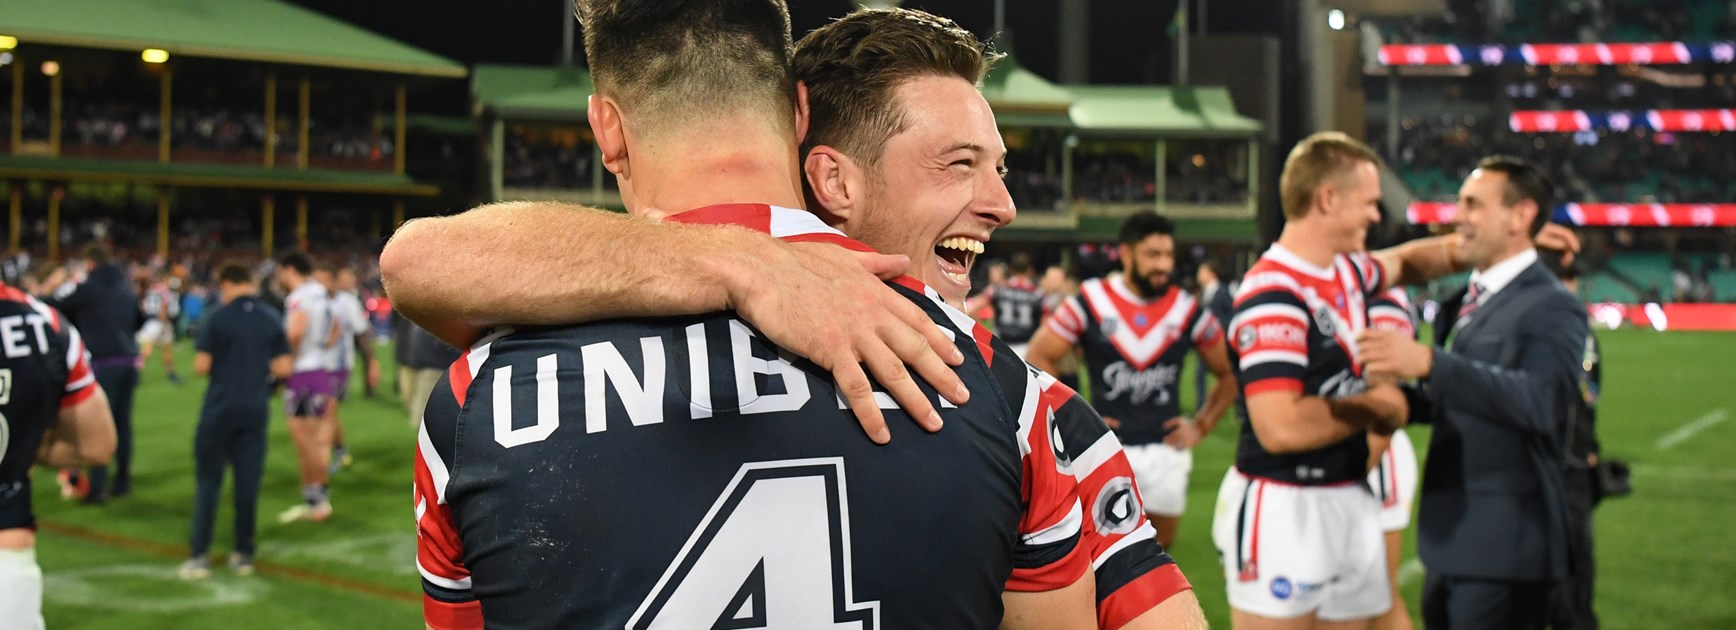 From Portugal to grand final: Verrills' rapid rise